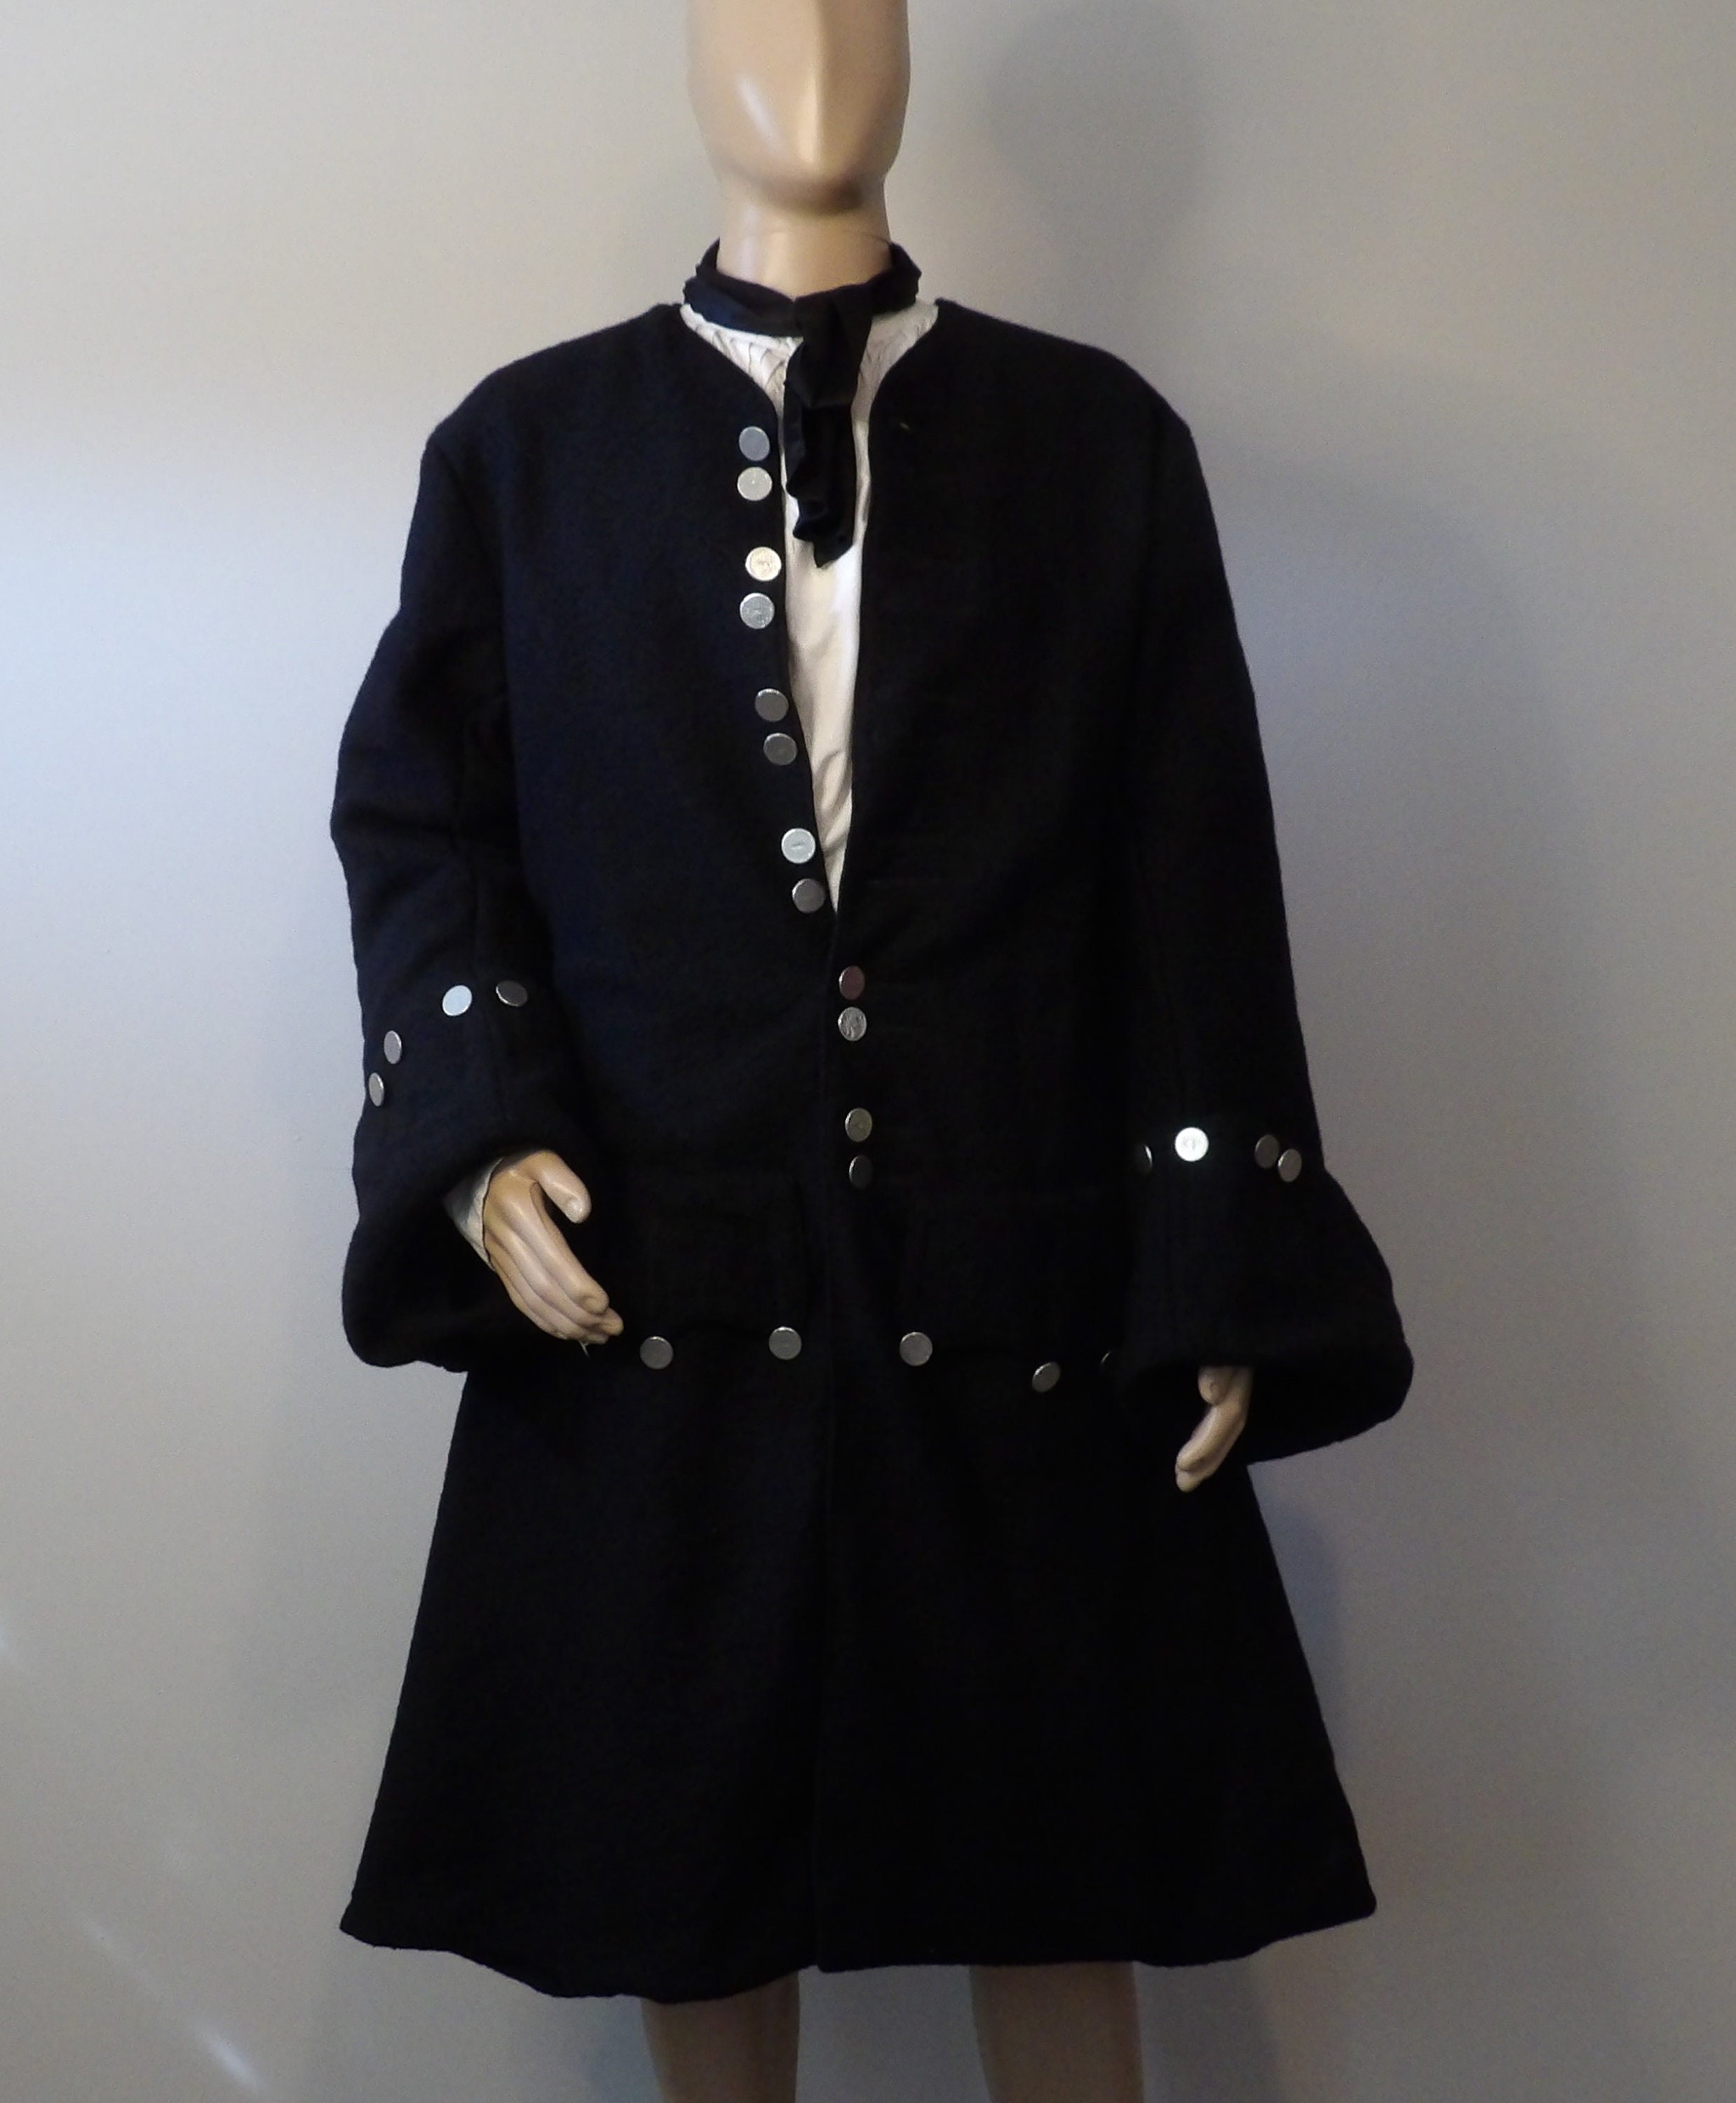 Mens Victorian Edwardian Frock Coat Costume 42  Complete Costumes  Costume Hire